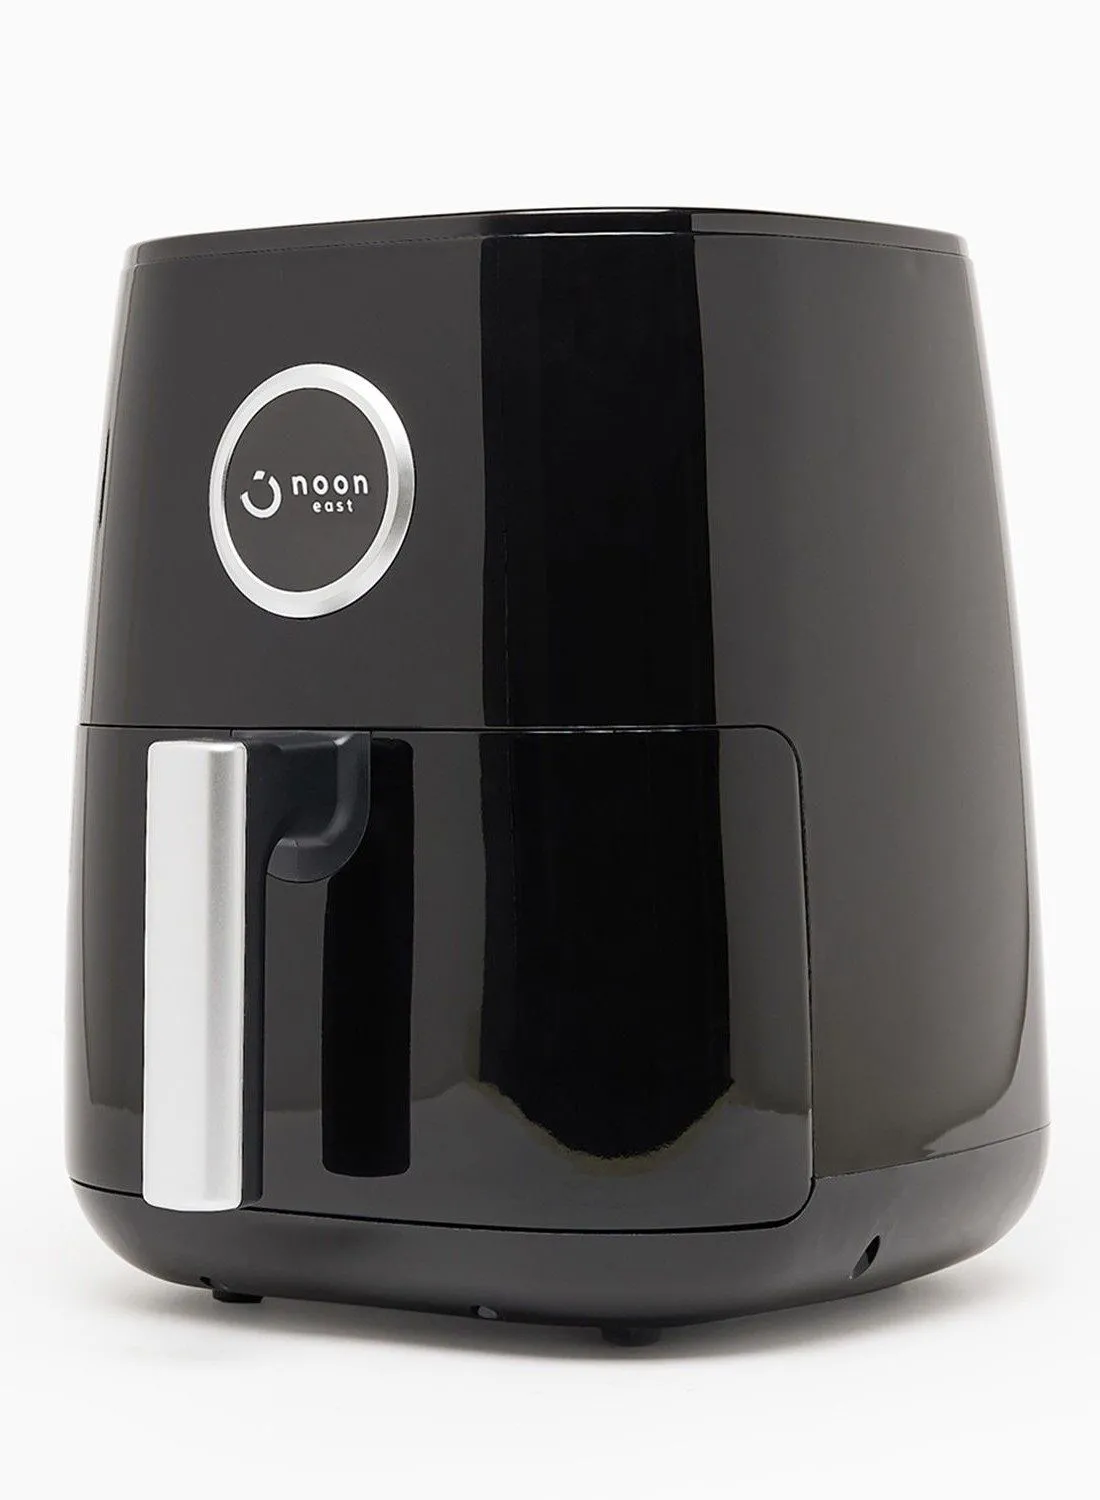 noon east Digital Touch Air Fryer 4 Liter Capacity - Overload Protection - Healthy Air Fryer Without Oil